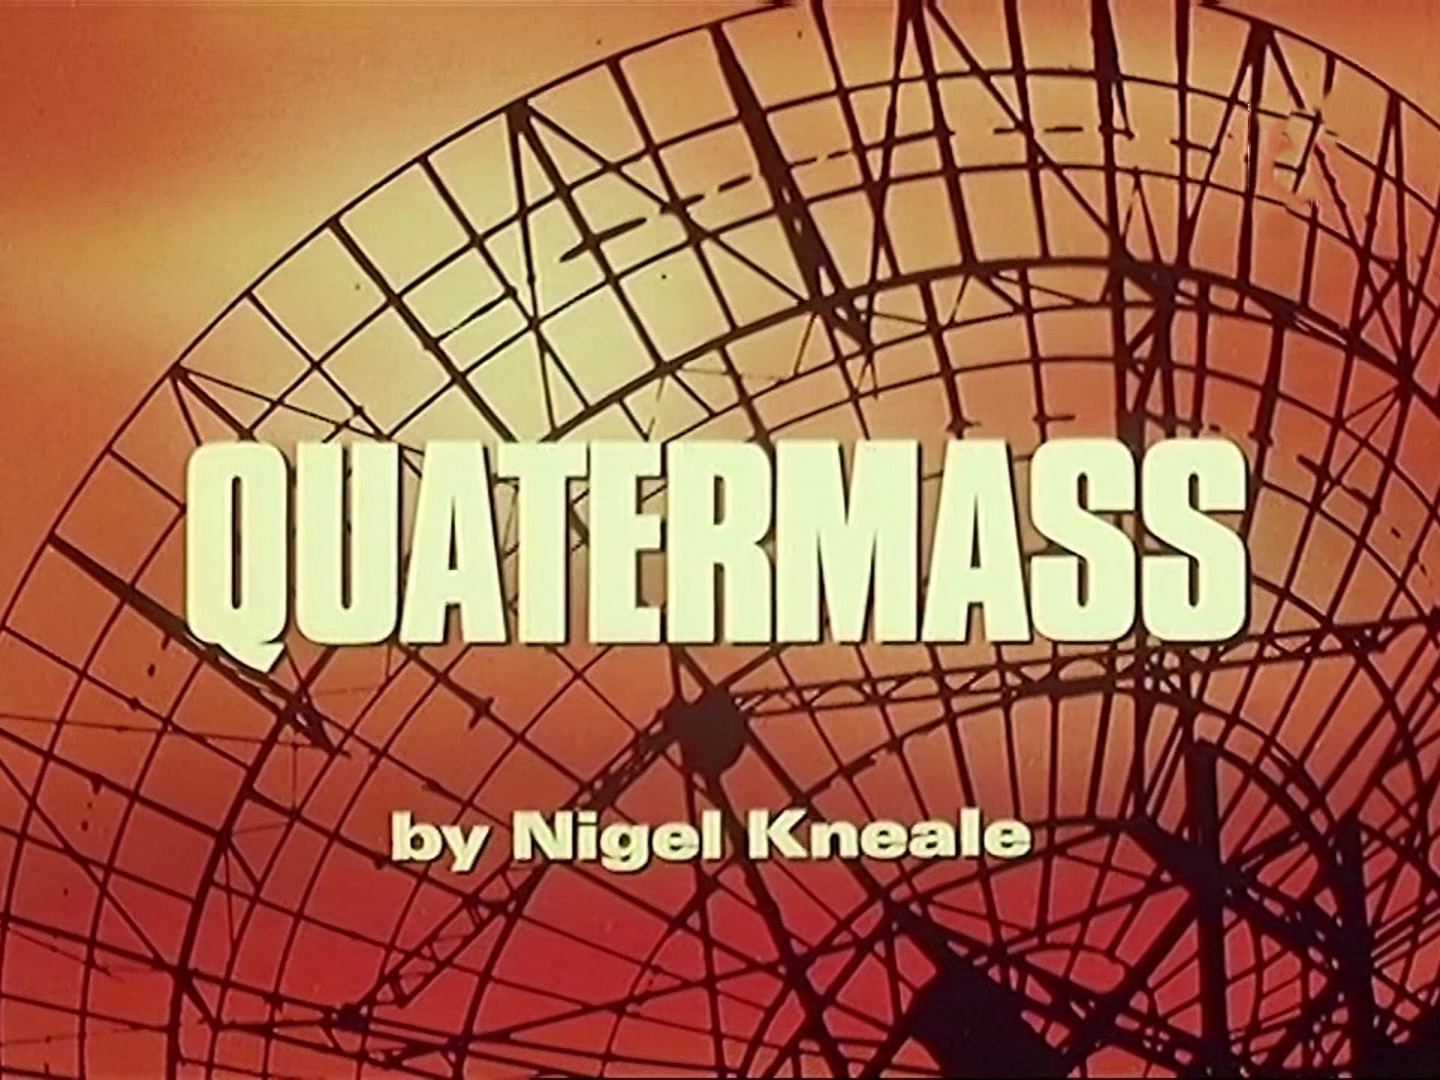 Main title from Quatermass (1979) (7). By Nigel Kneale